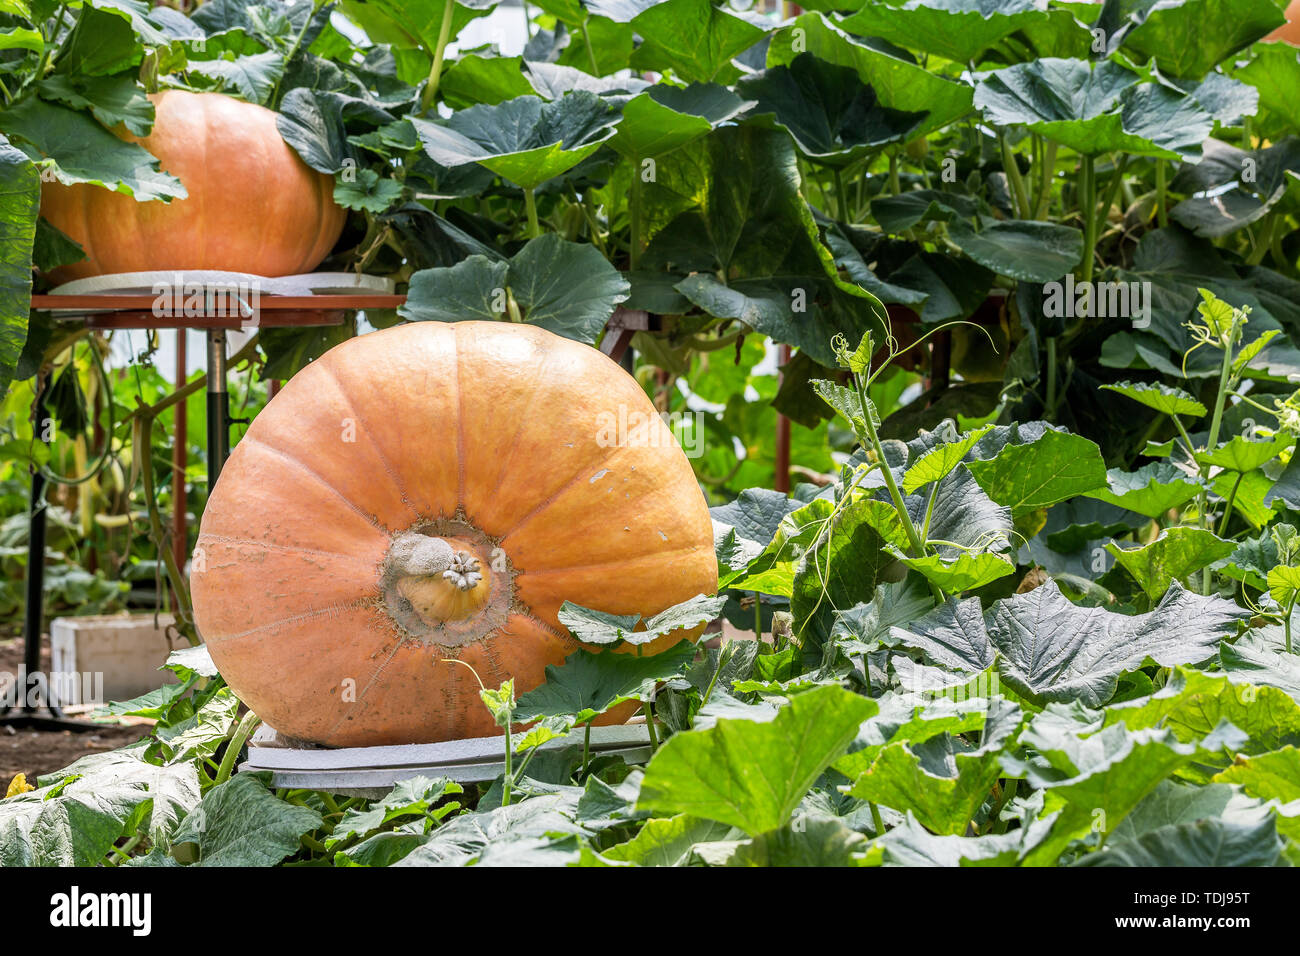 Giant pumpkin cultivation, photographed at Shandong Shouguang Cuisine Expo Stock Photo